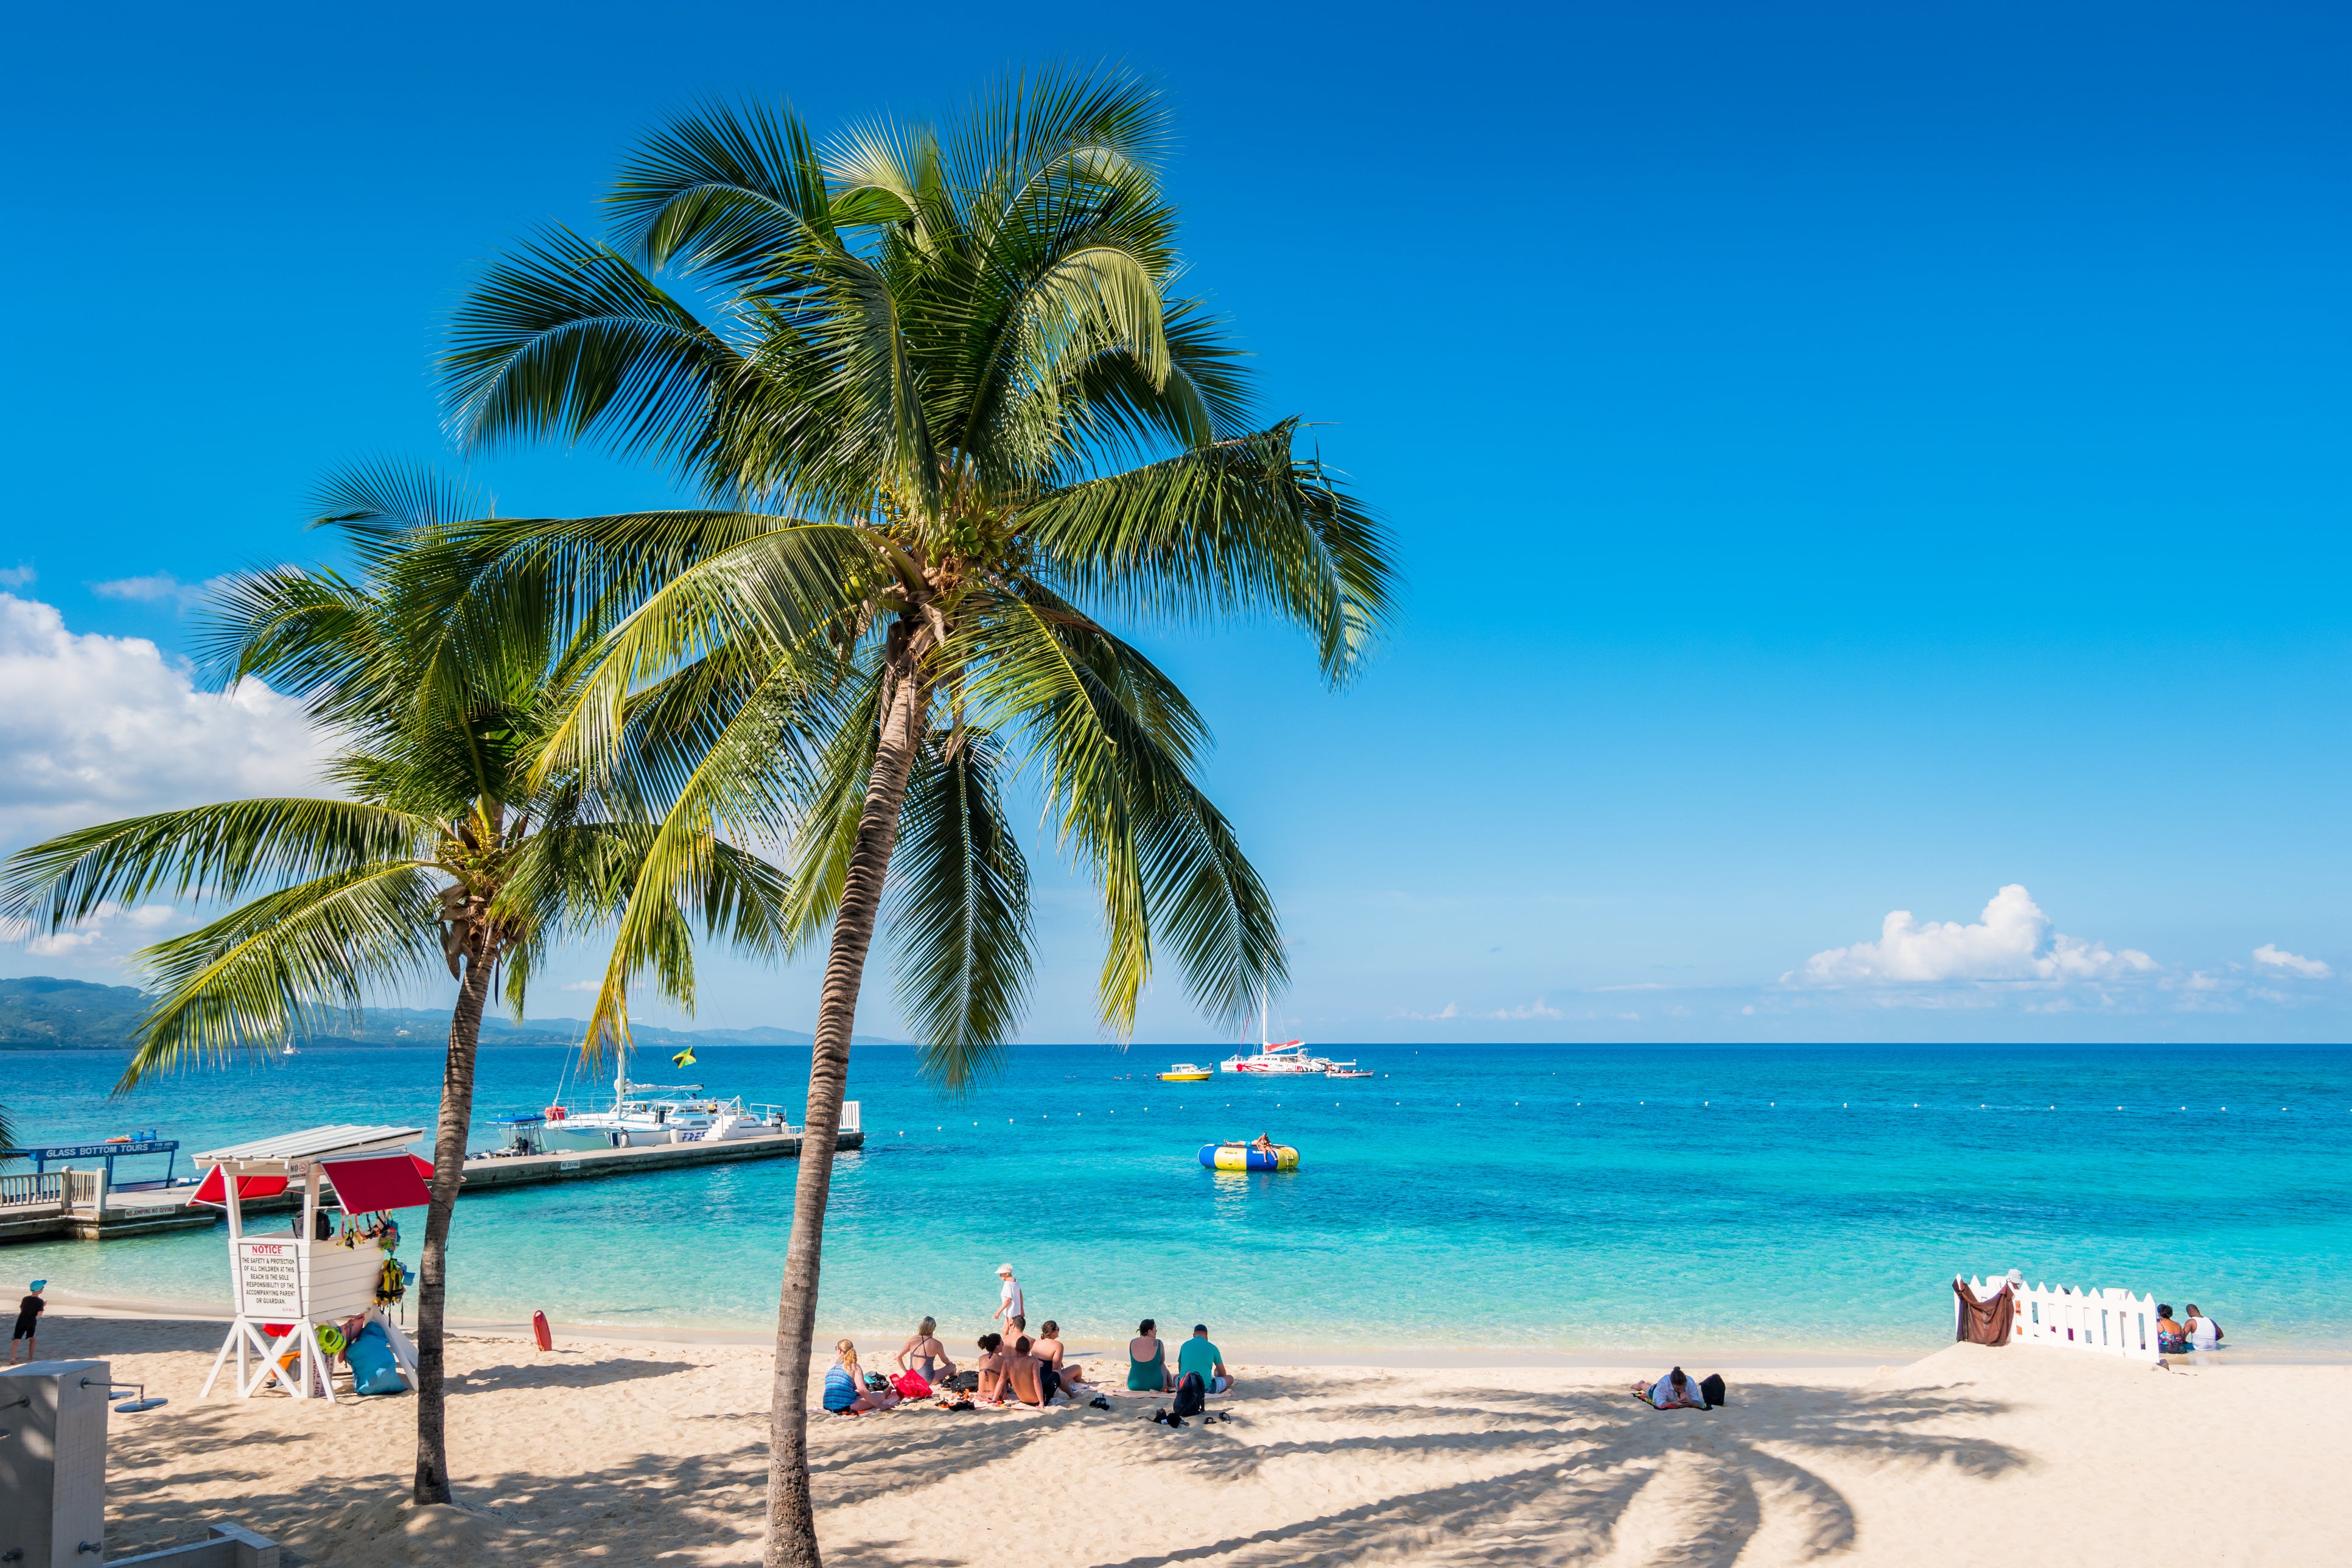 Jamaica’s vibrant culture is unrivalled for a lively, sun-drenched getaway